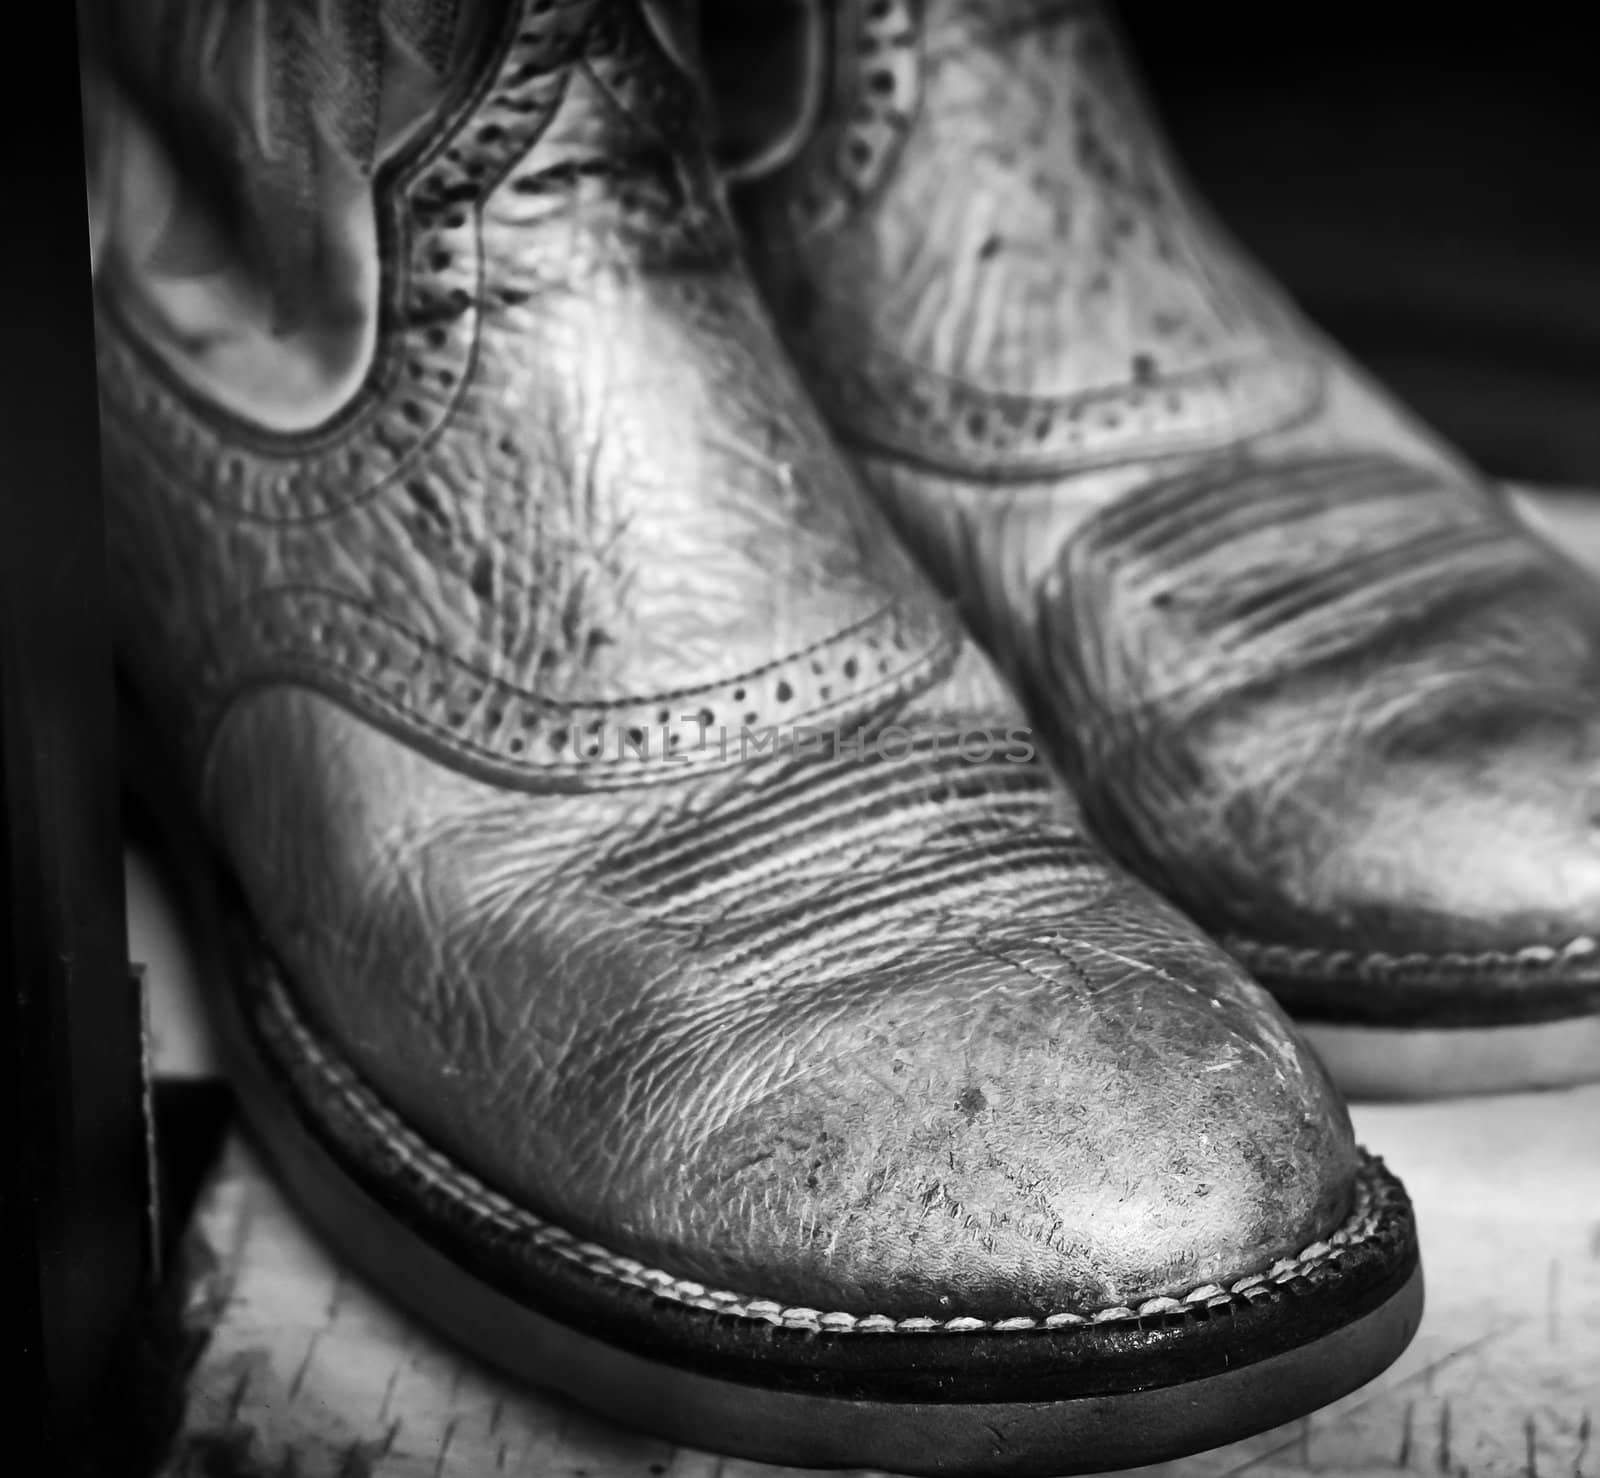 Worn Men's Shoes by wolterk